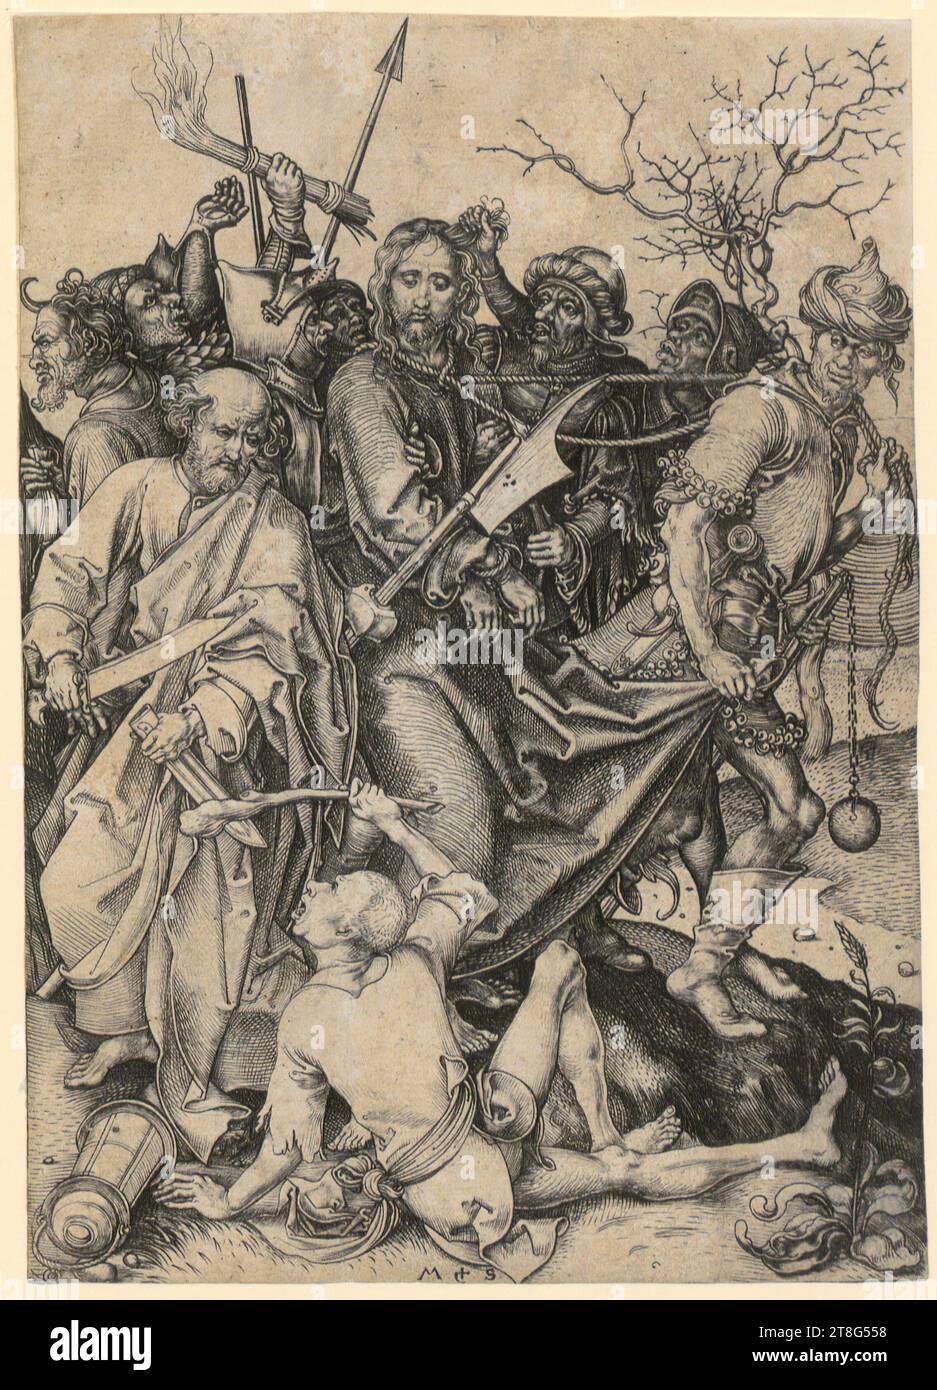 Martin Schongauer (1450 um - 1491), artist, Betrayal and Capture of Christ, sheet 2 of the series 'The Passion of Christ', print medium: 1470 - 1482, copperplate engraving, sheet size: 16.2 x 11.5 cm, bottom center monogrammed 'M + S Stock Photo